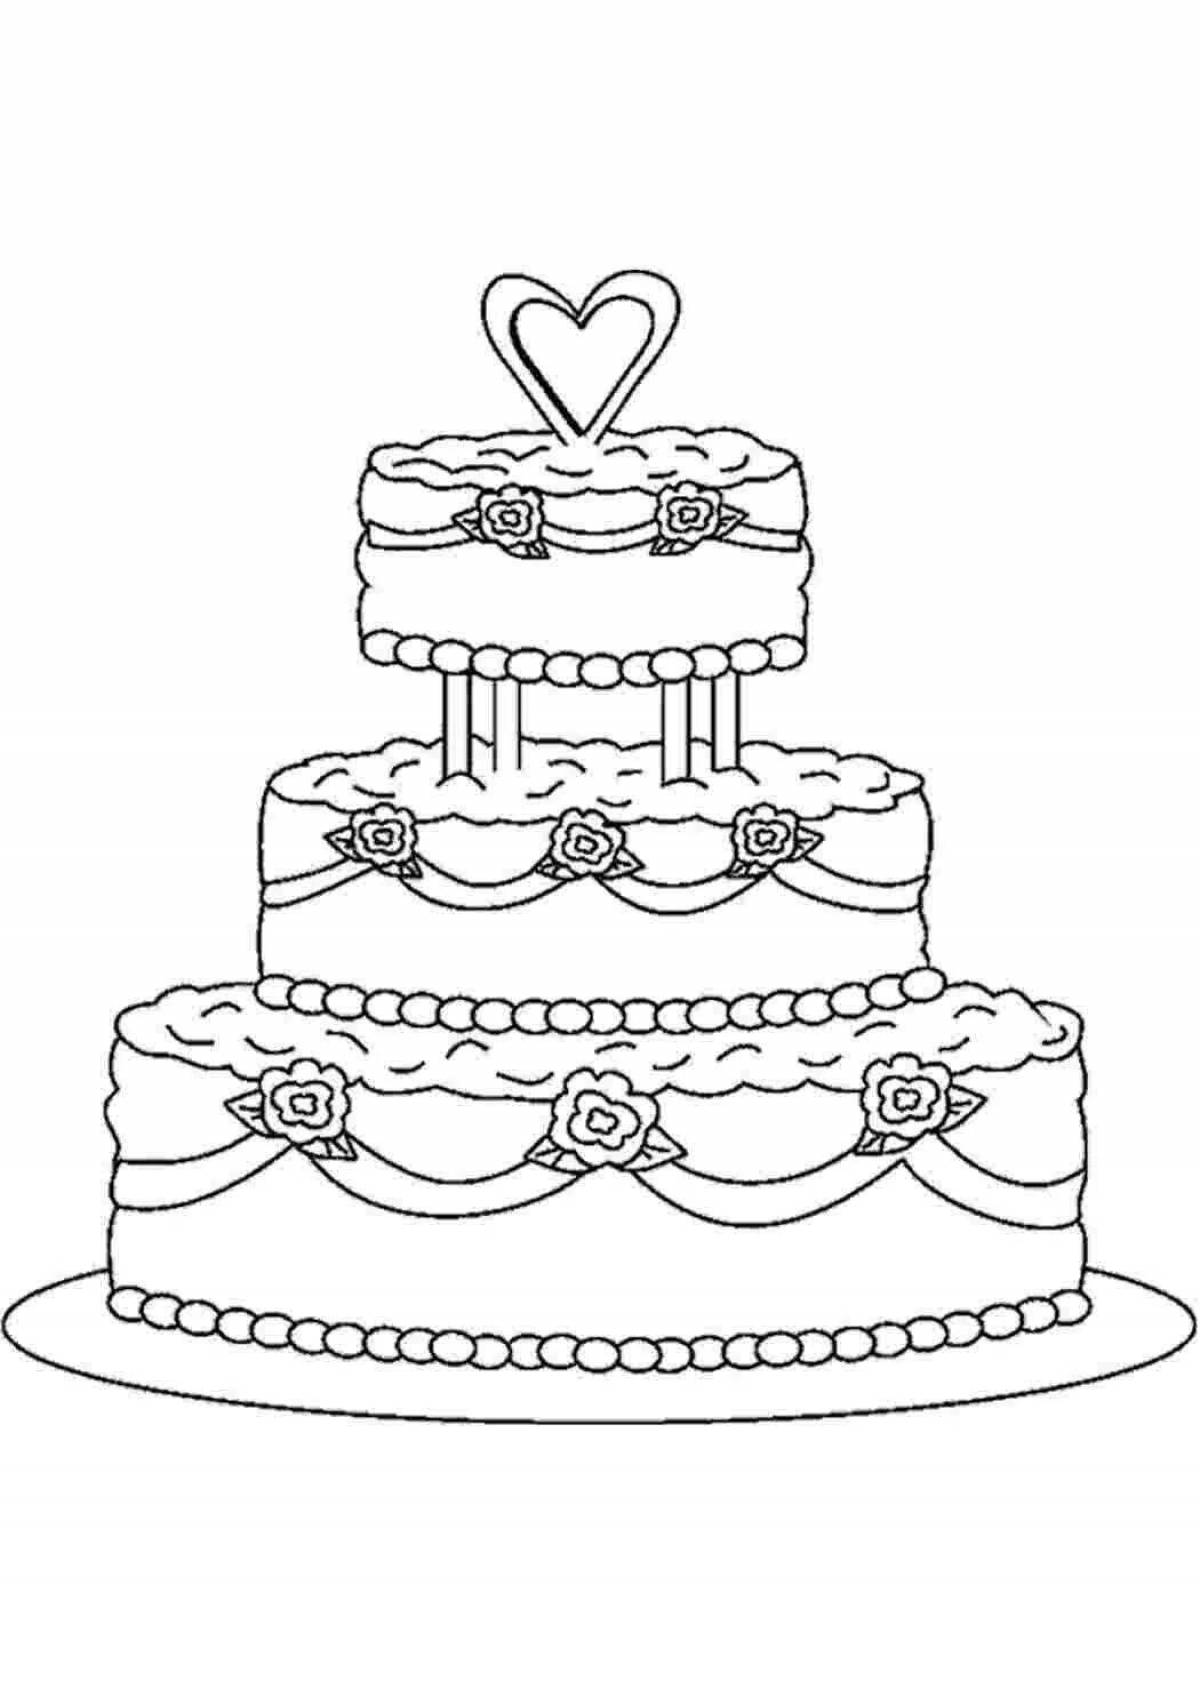 Adorable birthday cake coloring page